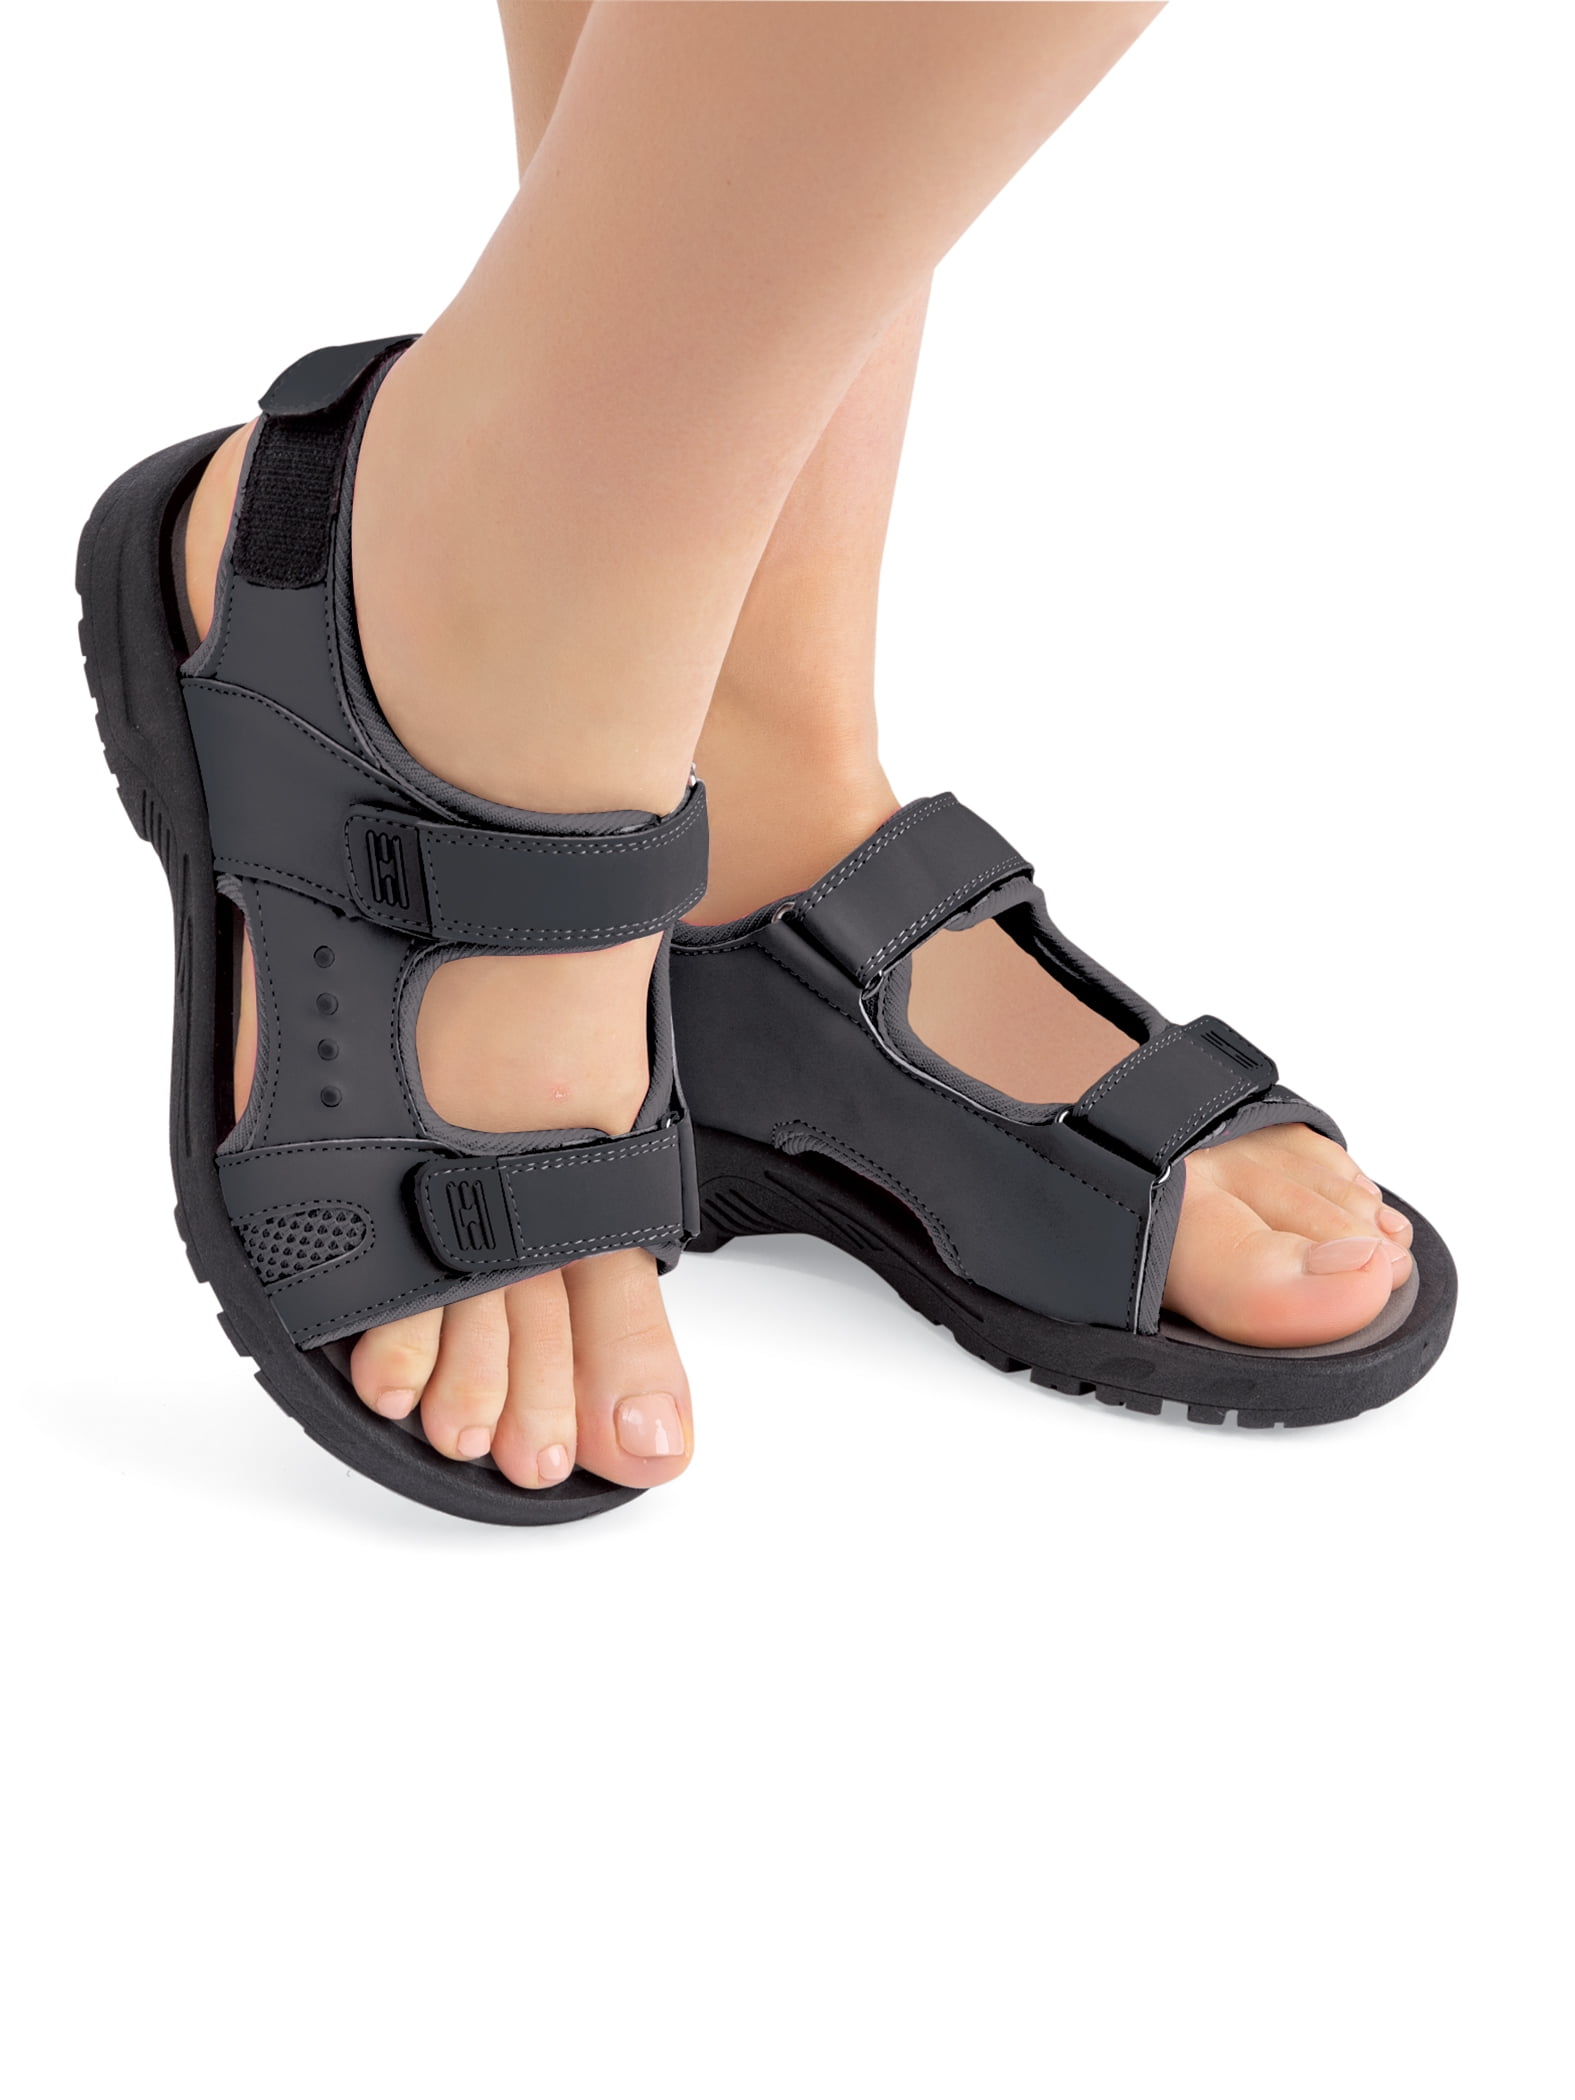 leather sandals for women,with adjustable straps